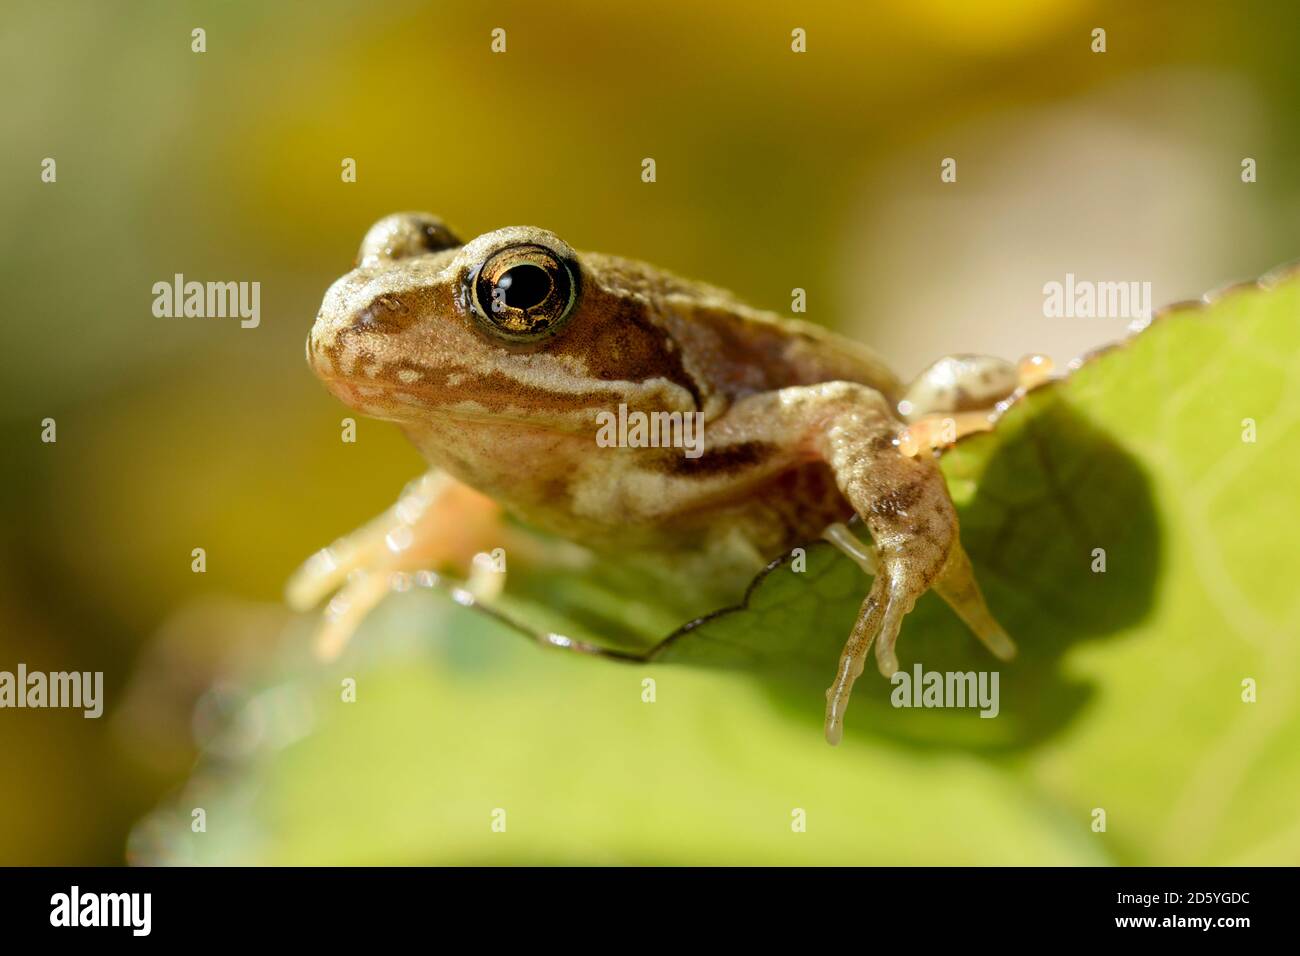 Portrait of Common frog, Rana temporaria, sitting on a leaf Stock Photo